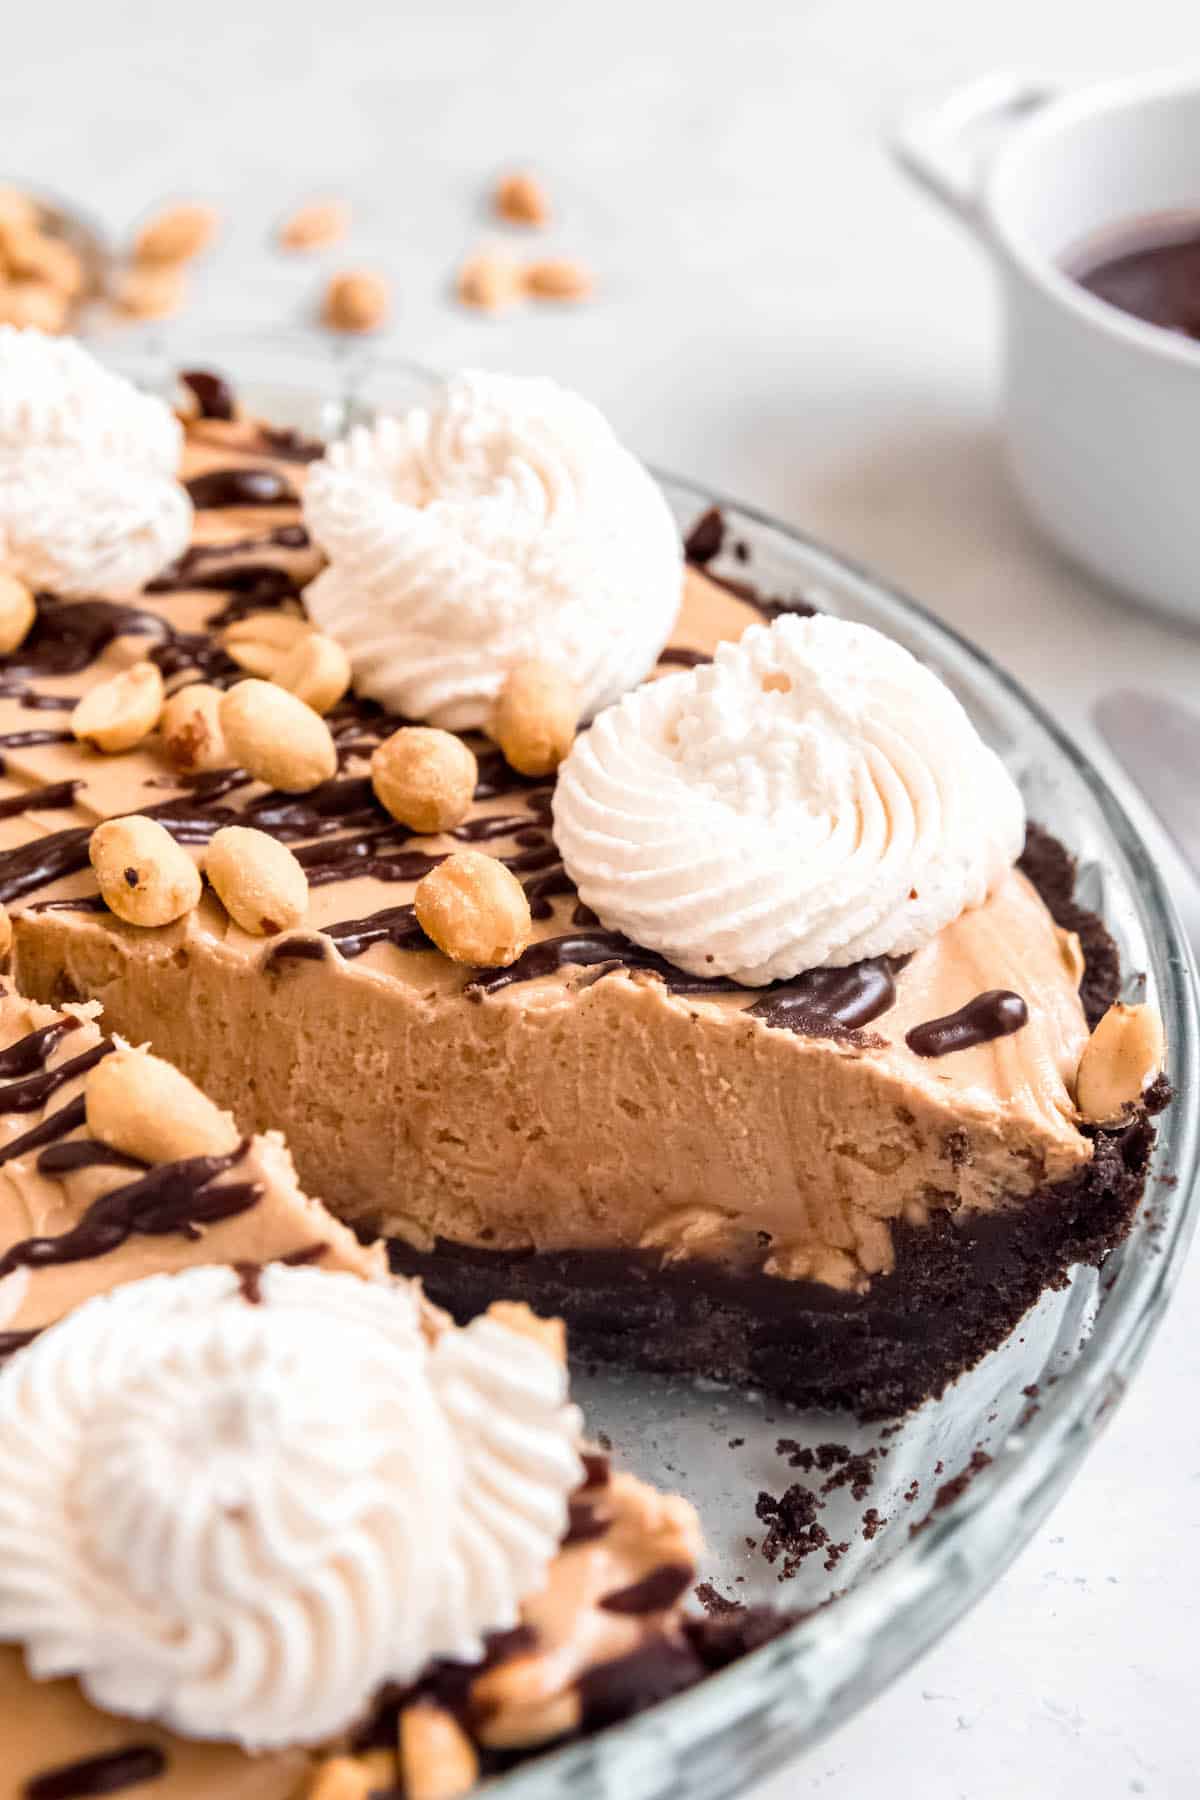 45 degree angle hero shot of the chocolate peanut butter oreo pie with a slice removed to show the layers of oreo crust, chocolate peanut butter ganache, roasted peanuts, peanut butter cream cheese mousse, and all the garnishes.